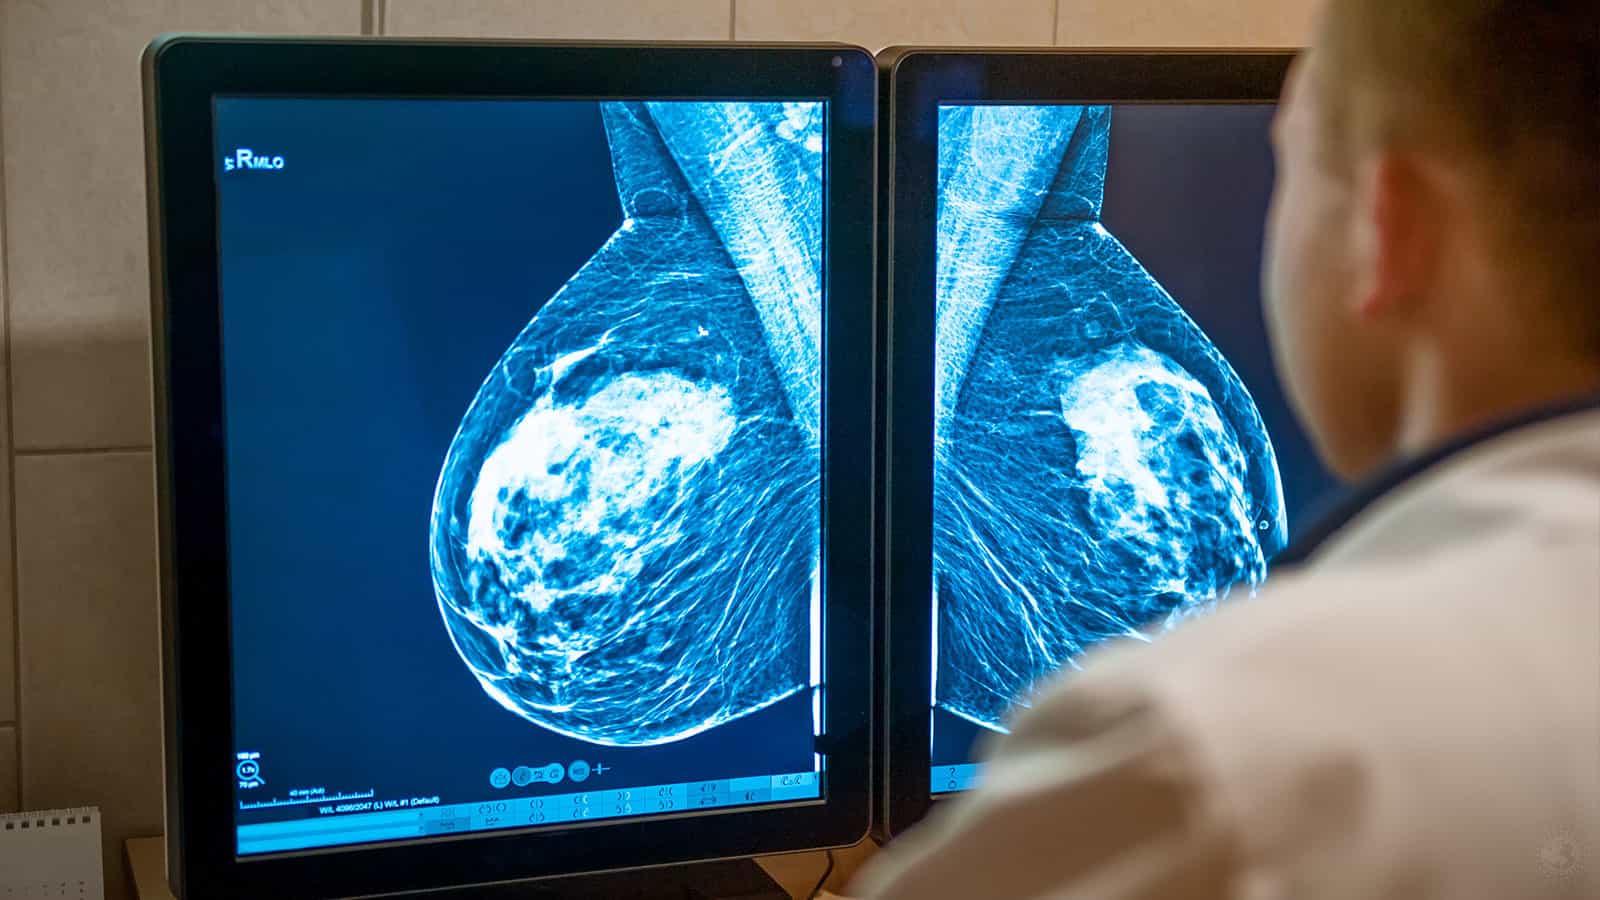 Doctors Explain A Mammogram is the Best Way to Detect Breast Cancer